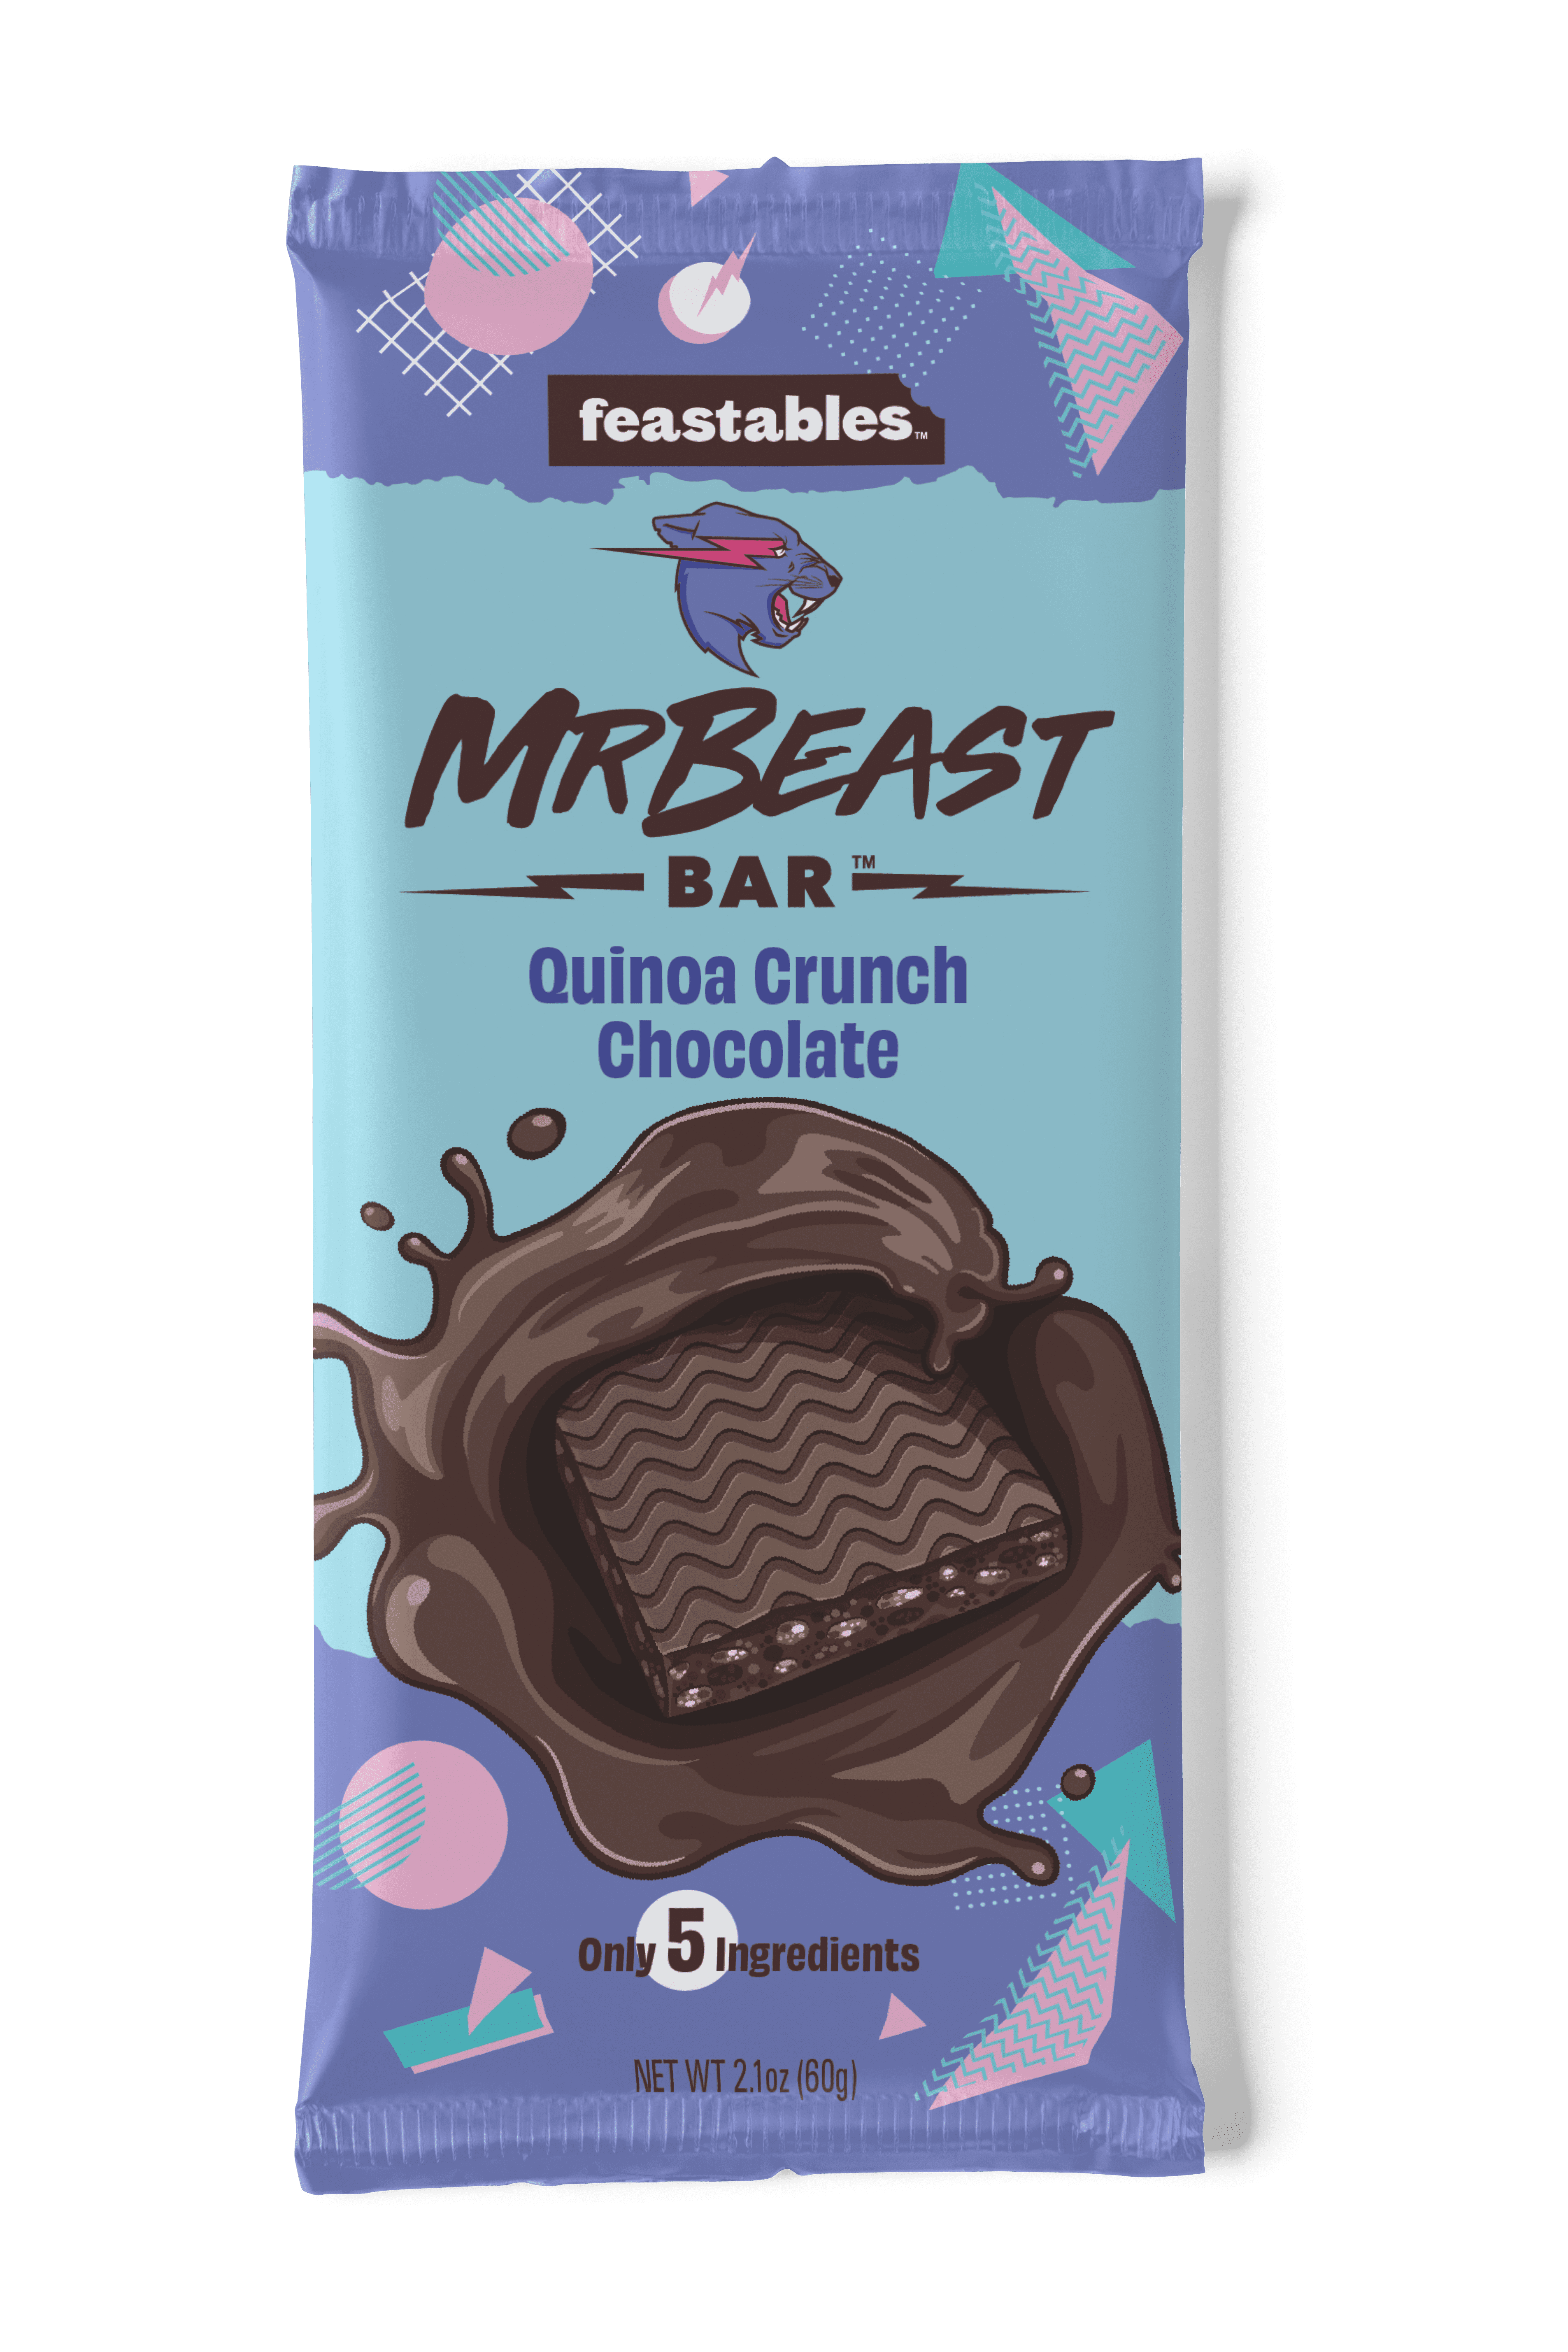 Feastables MrBeast Quinoa Crunch Chocolate Bars - Made with Organic Cocoa.  Plant Based with Only 5 Ingredients, 10 Count